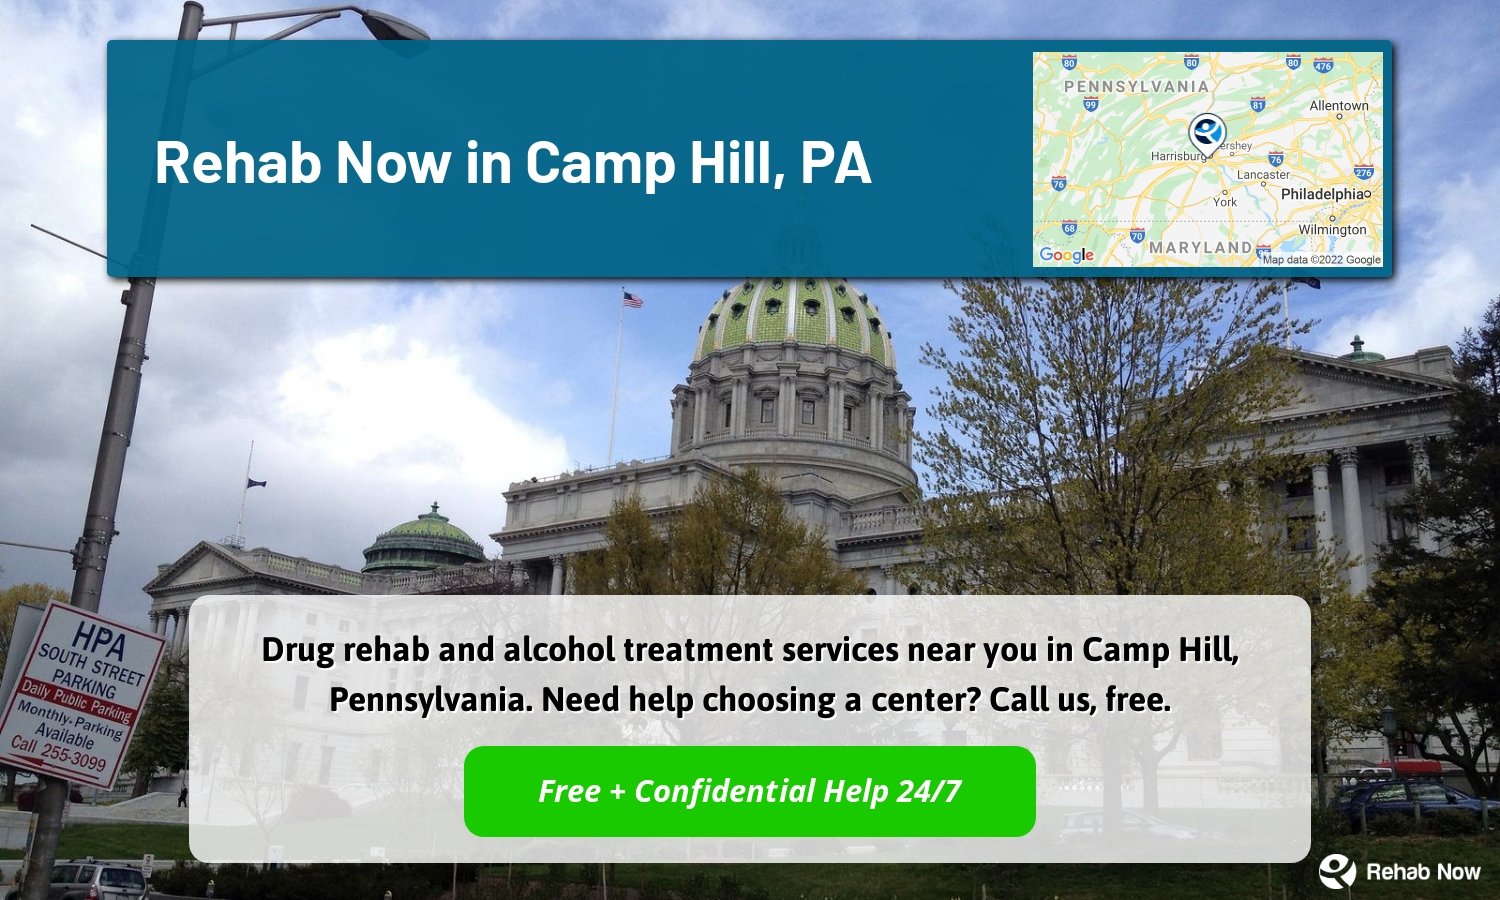 Drug rehab and alcohol treatment services near you in Camp Hill, Pennsylvania. Need help choosing a center? Call us, free.